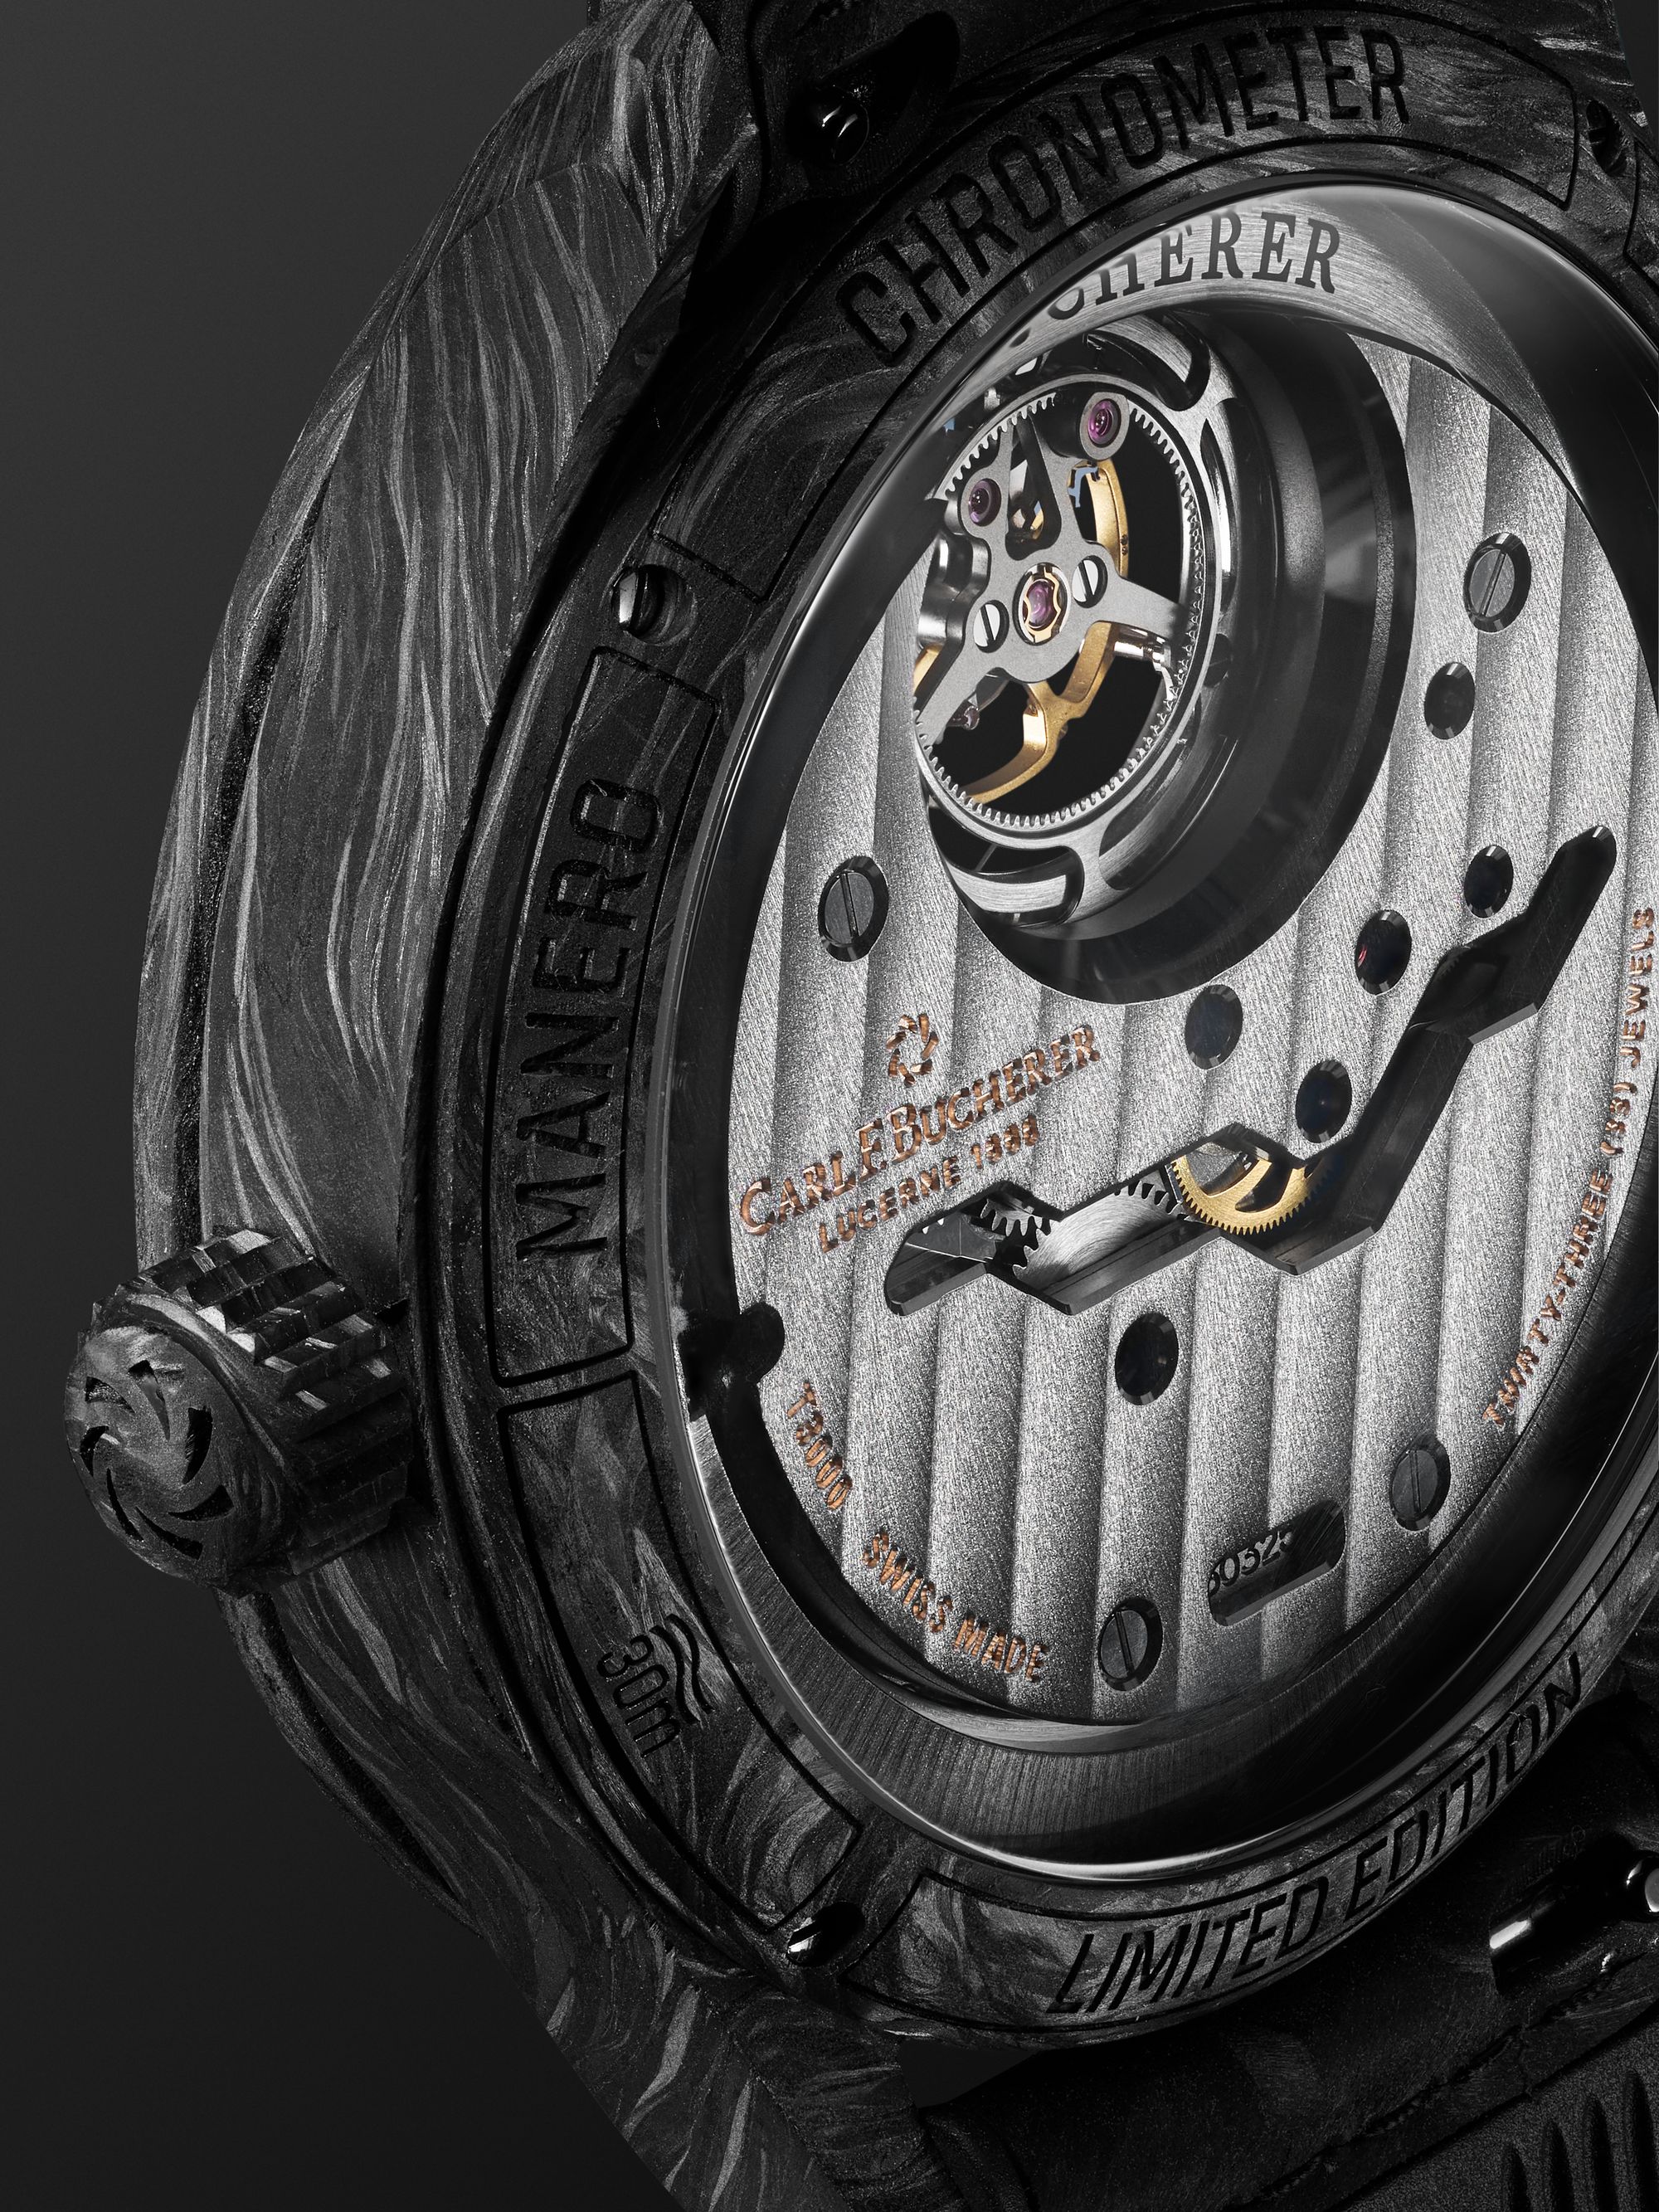 CARL F. BUCHERER Manero Tourbillon Double Peripheral Limited Edition Automatic 43.1mm Forged Carbon Titanium and Rubber Watch, Ref. No 00.10920.16.33.01